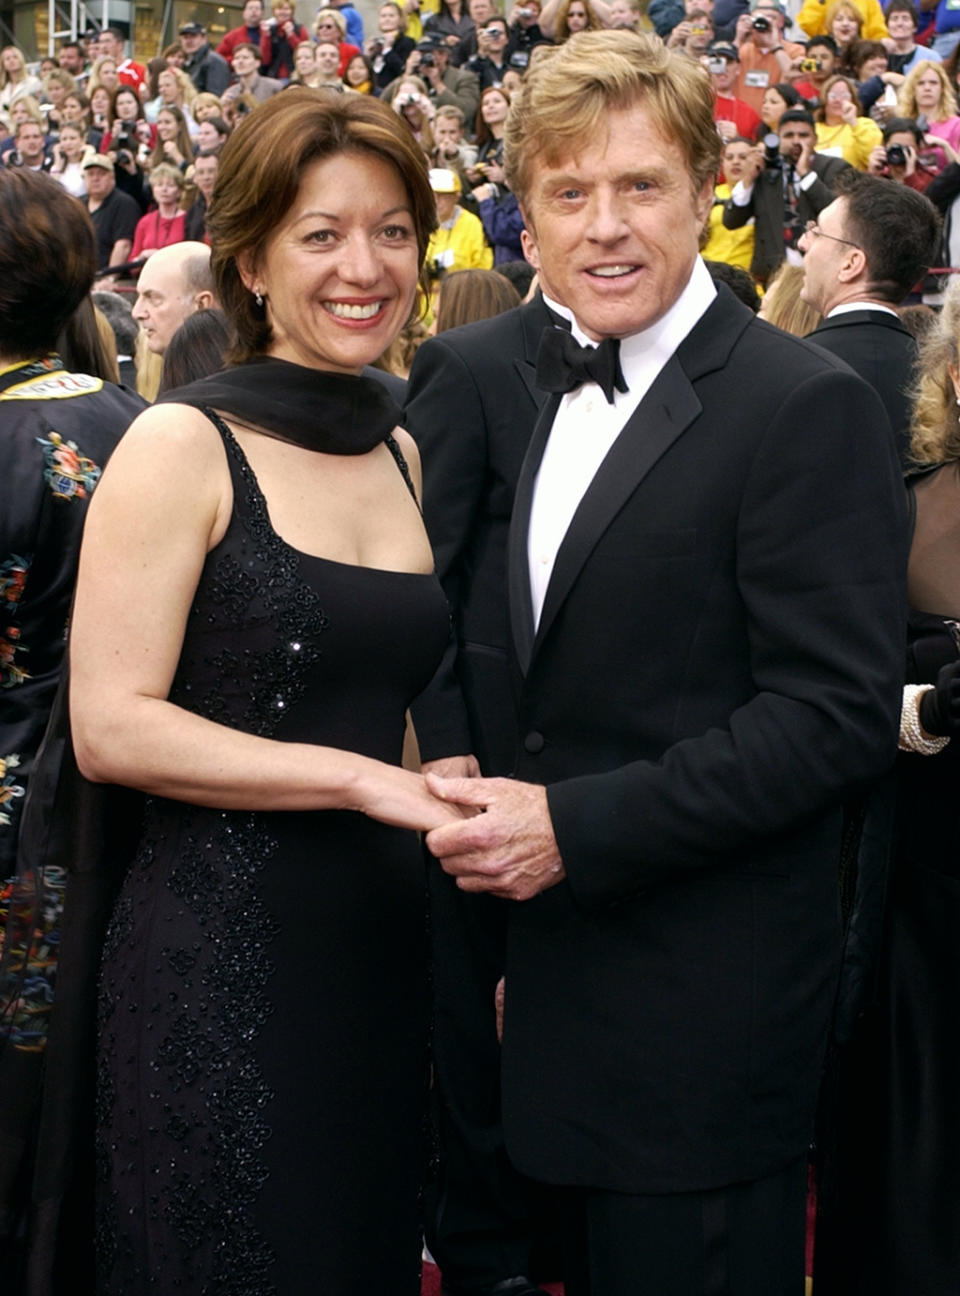 Robert Redford and Sibylle Szaggars